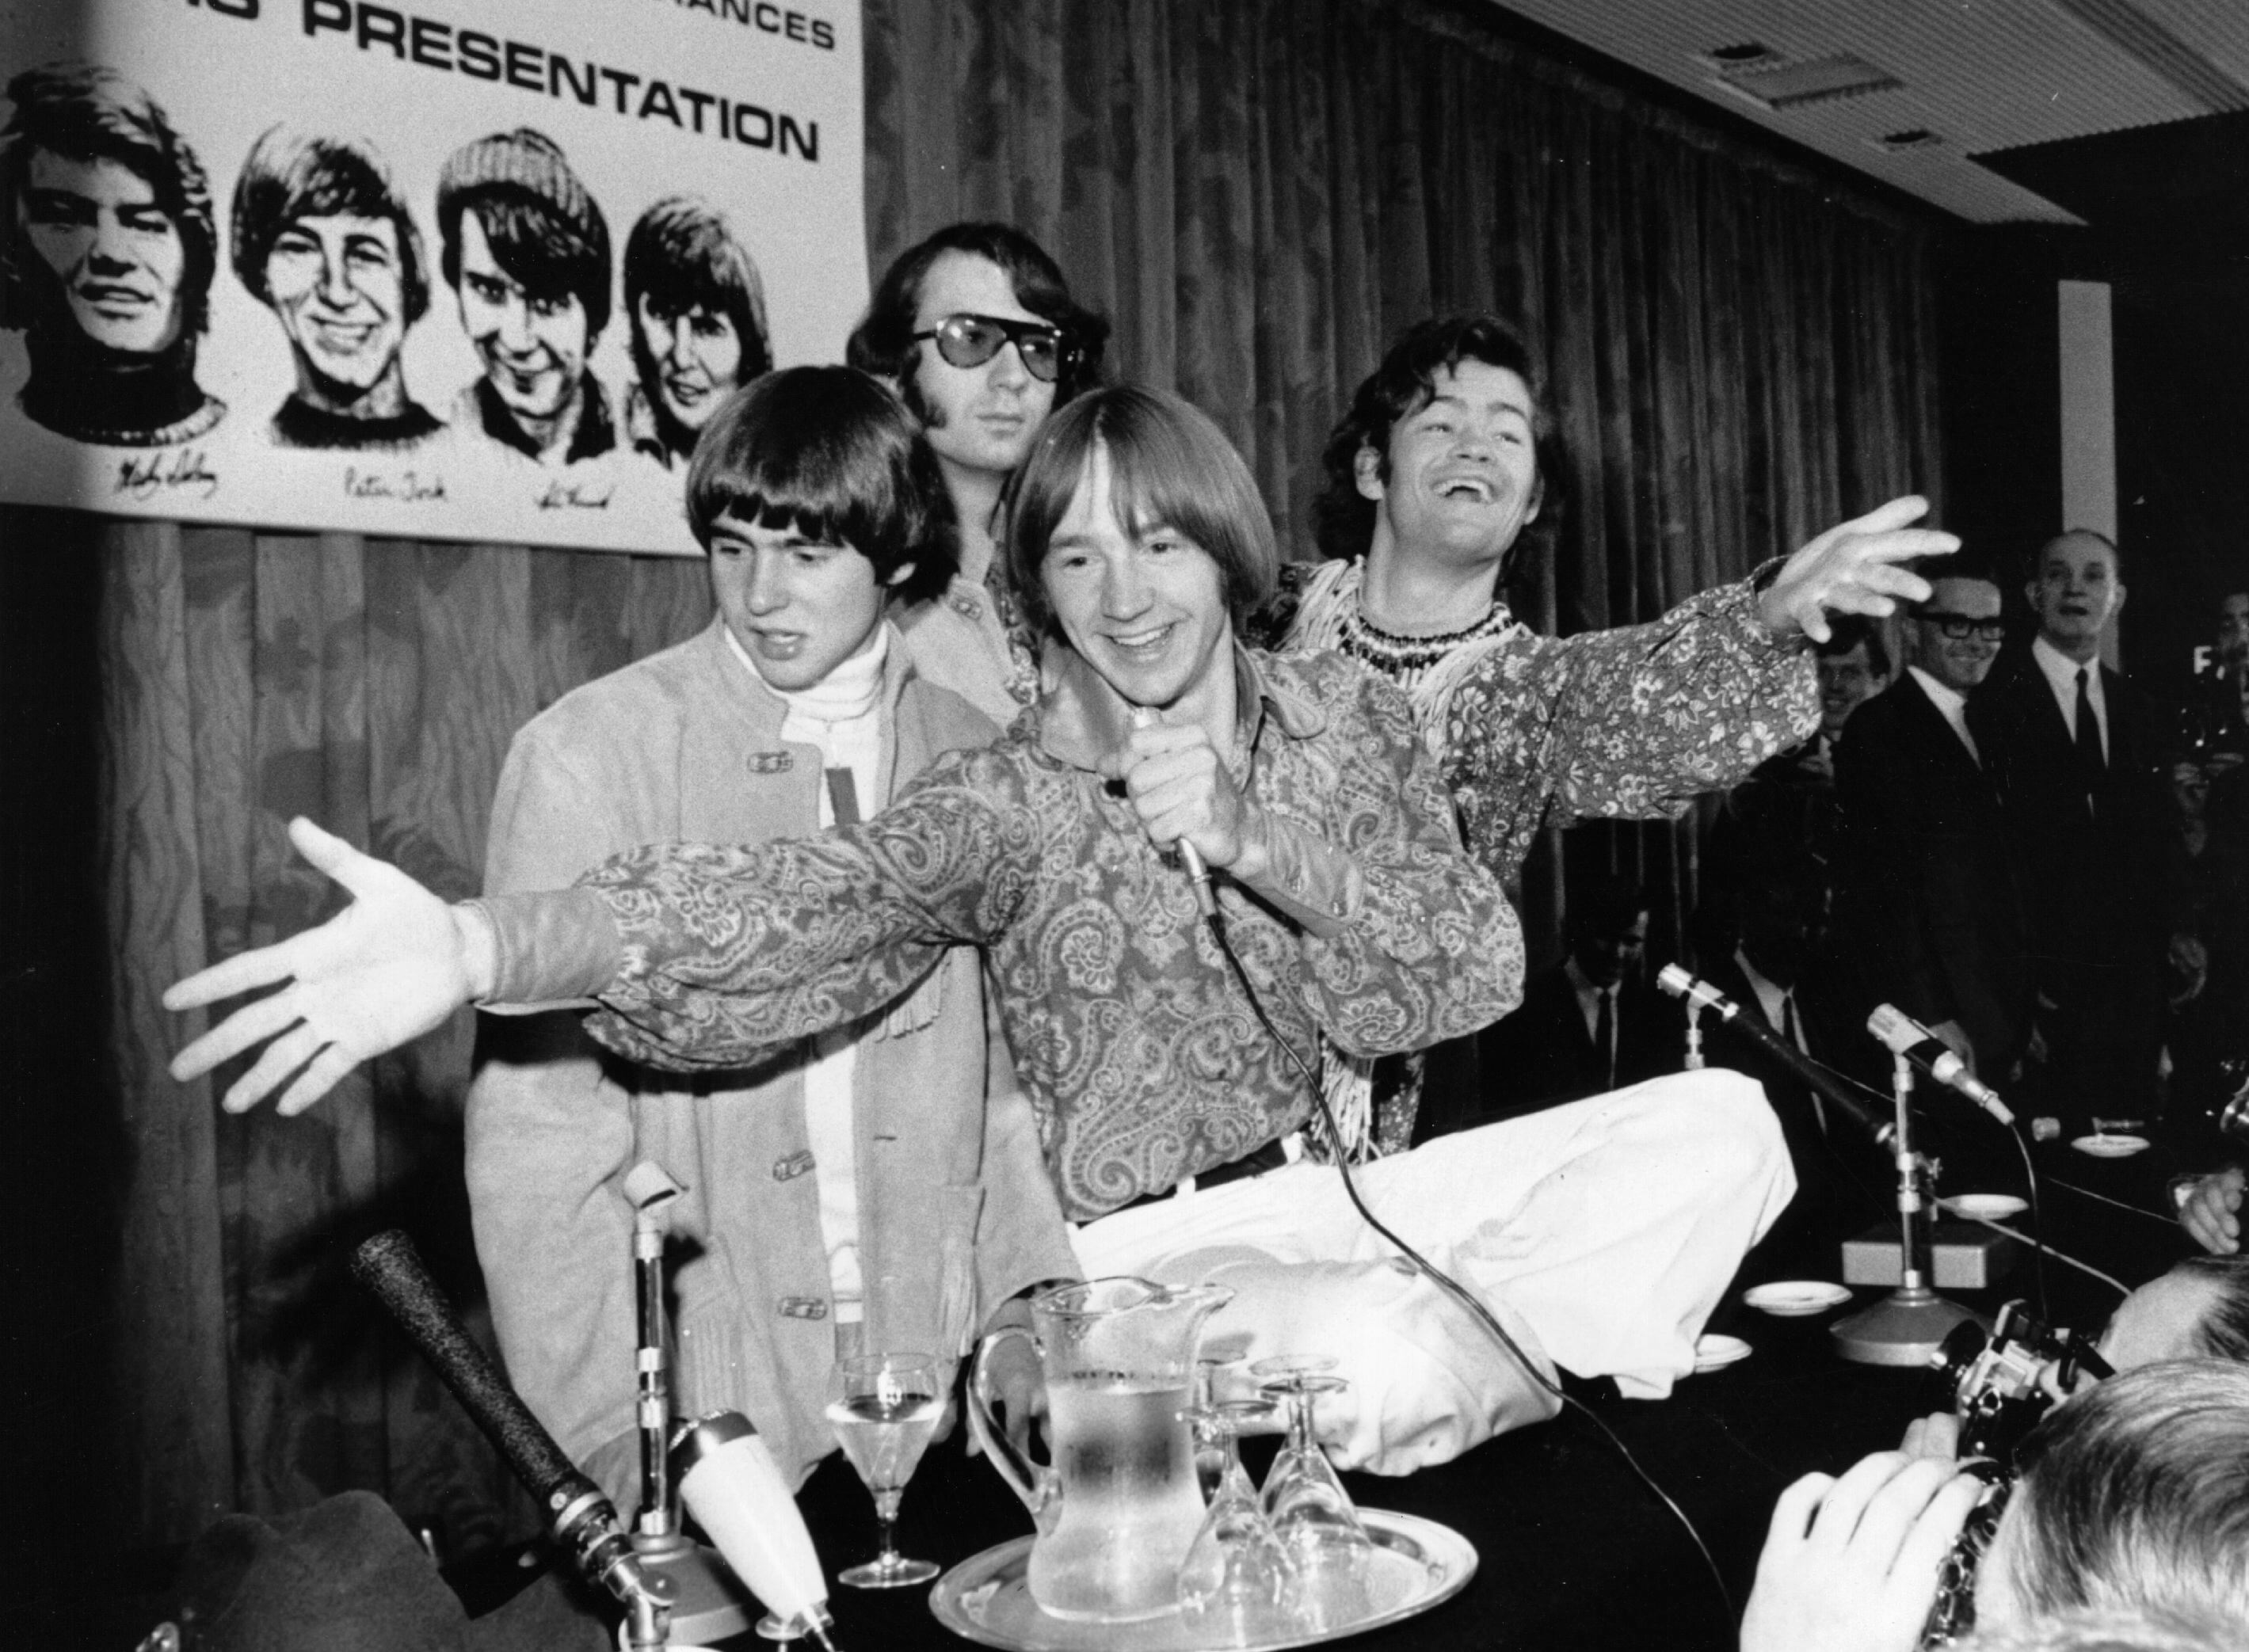 The Monkees with a pitcher 